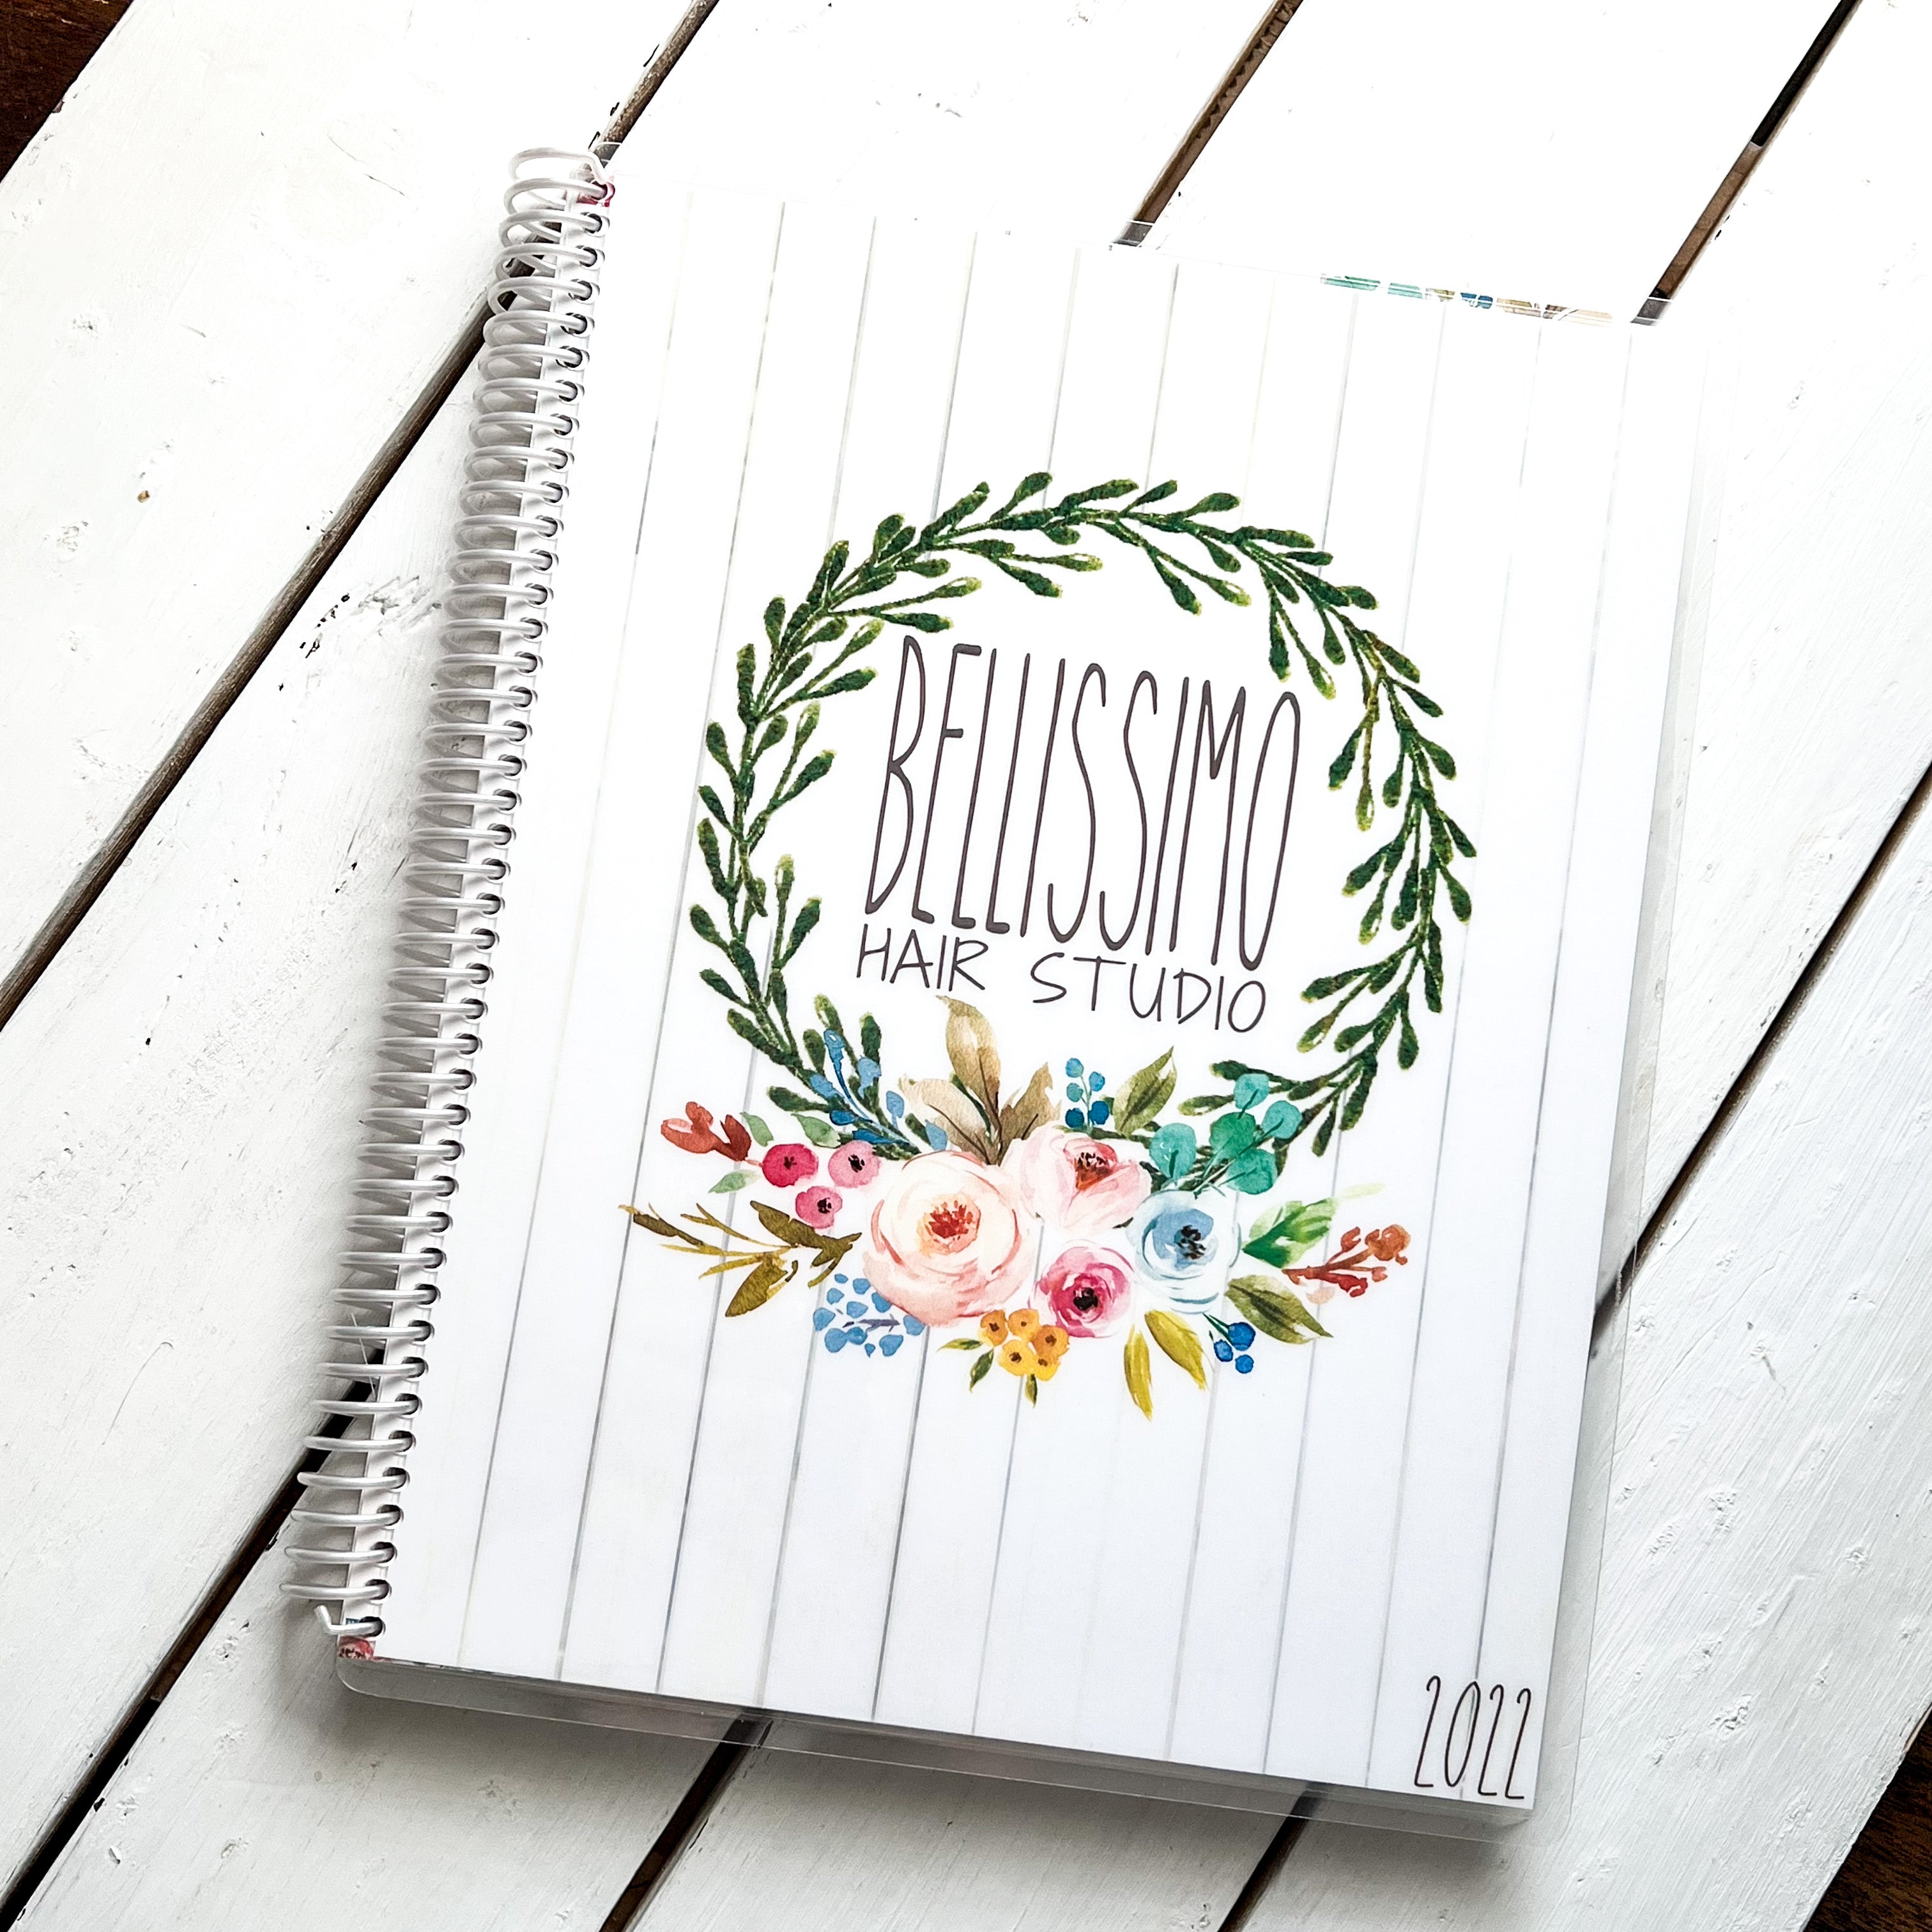 Sales Tracker Appointment Book - BOHO ABSTRACT 2